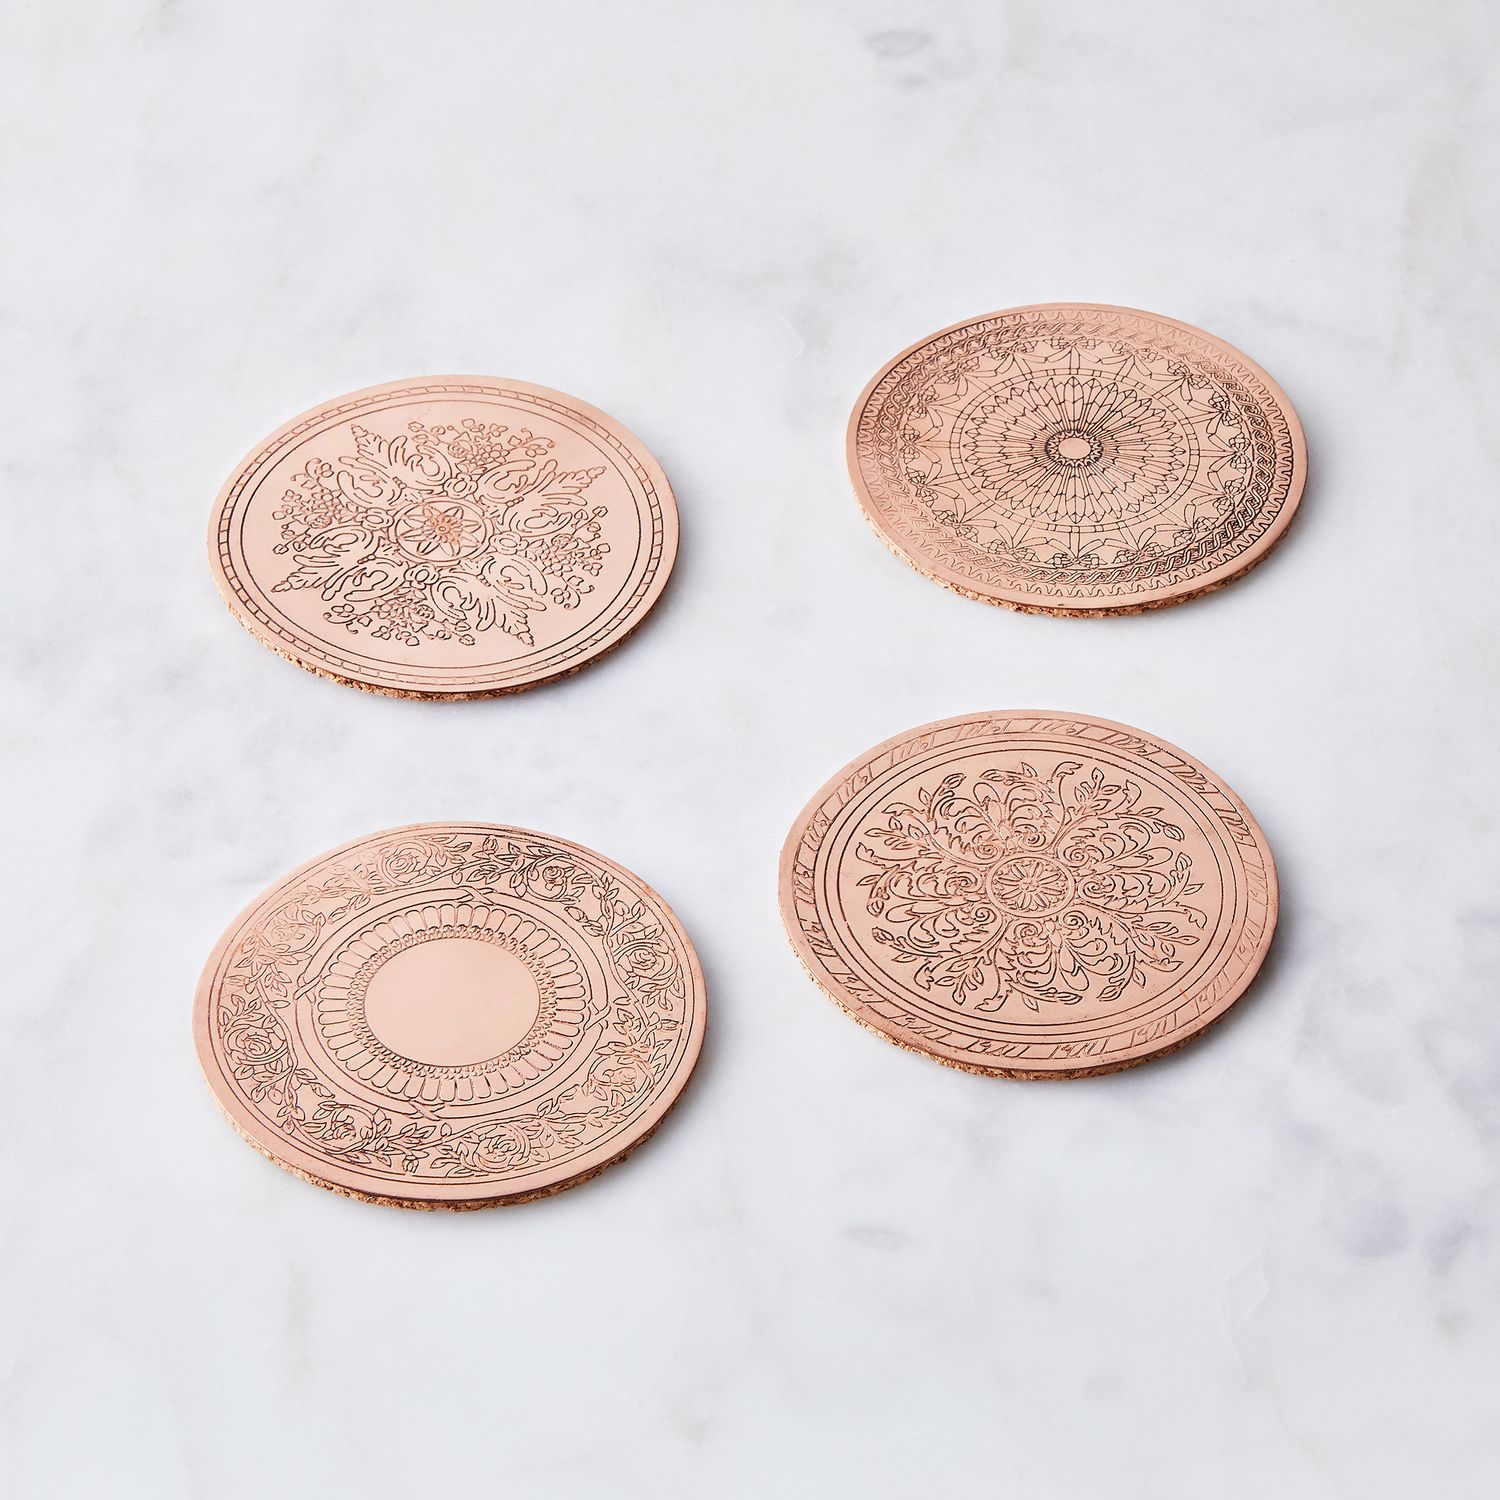 Coppermill Kitchen Vintage Embossed Copper Coasters Set Of 4 On Food52